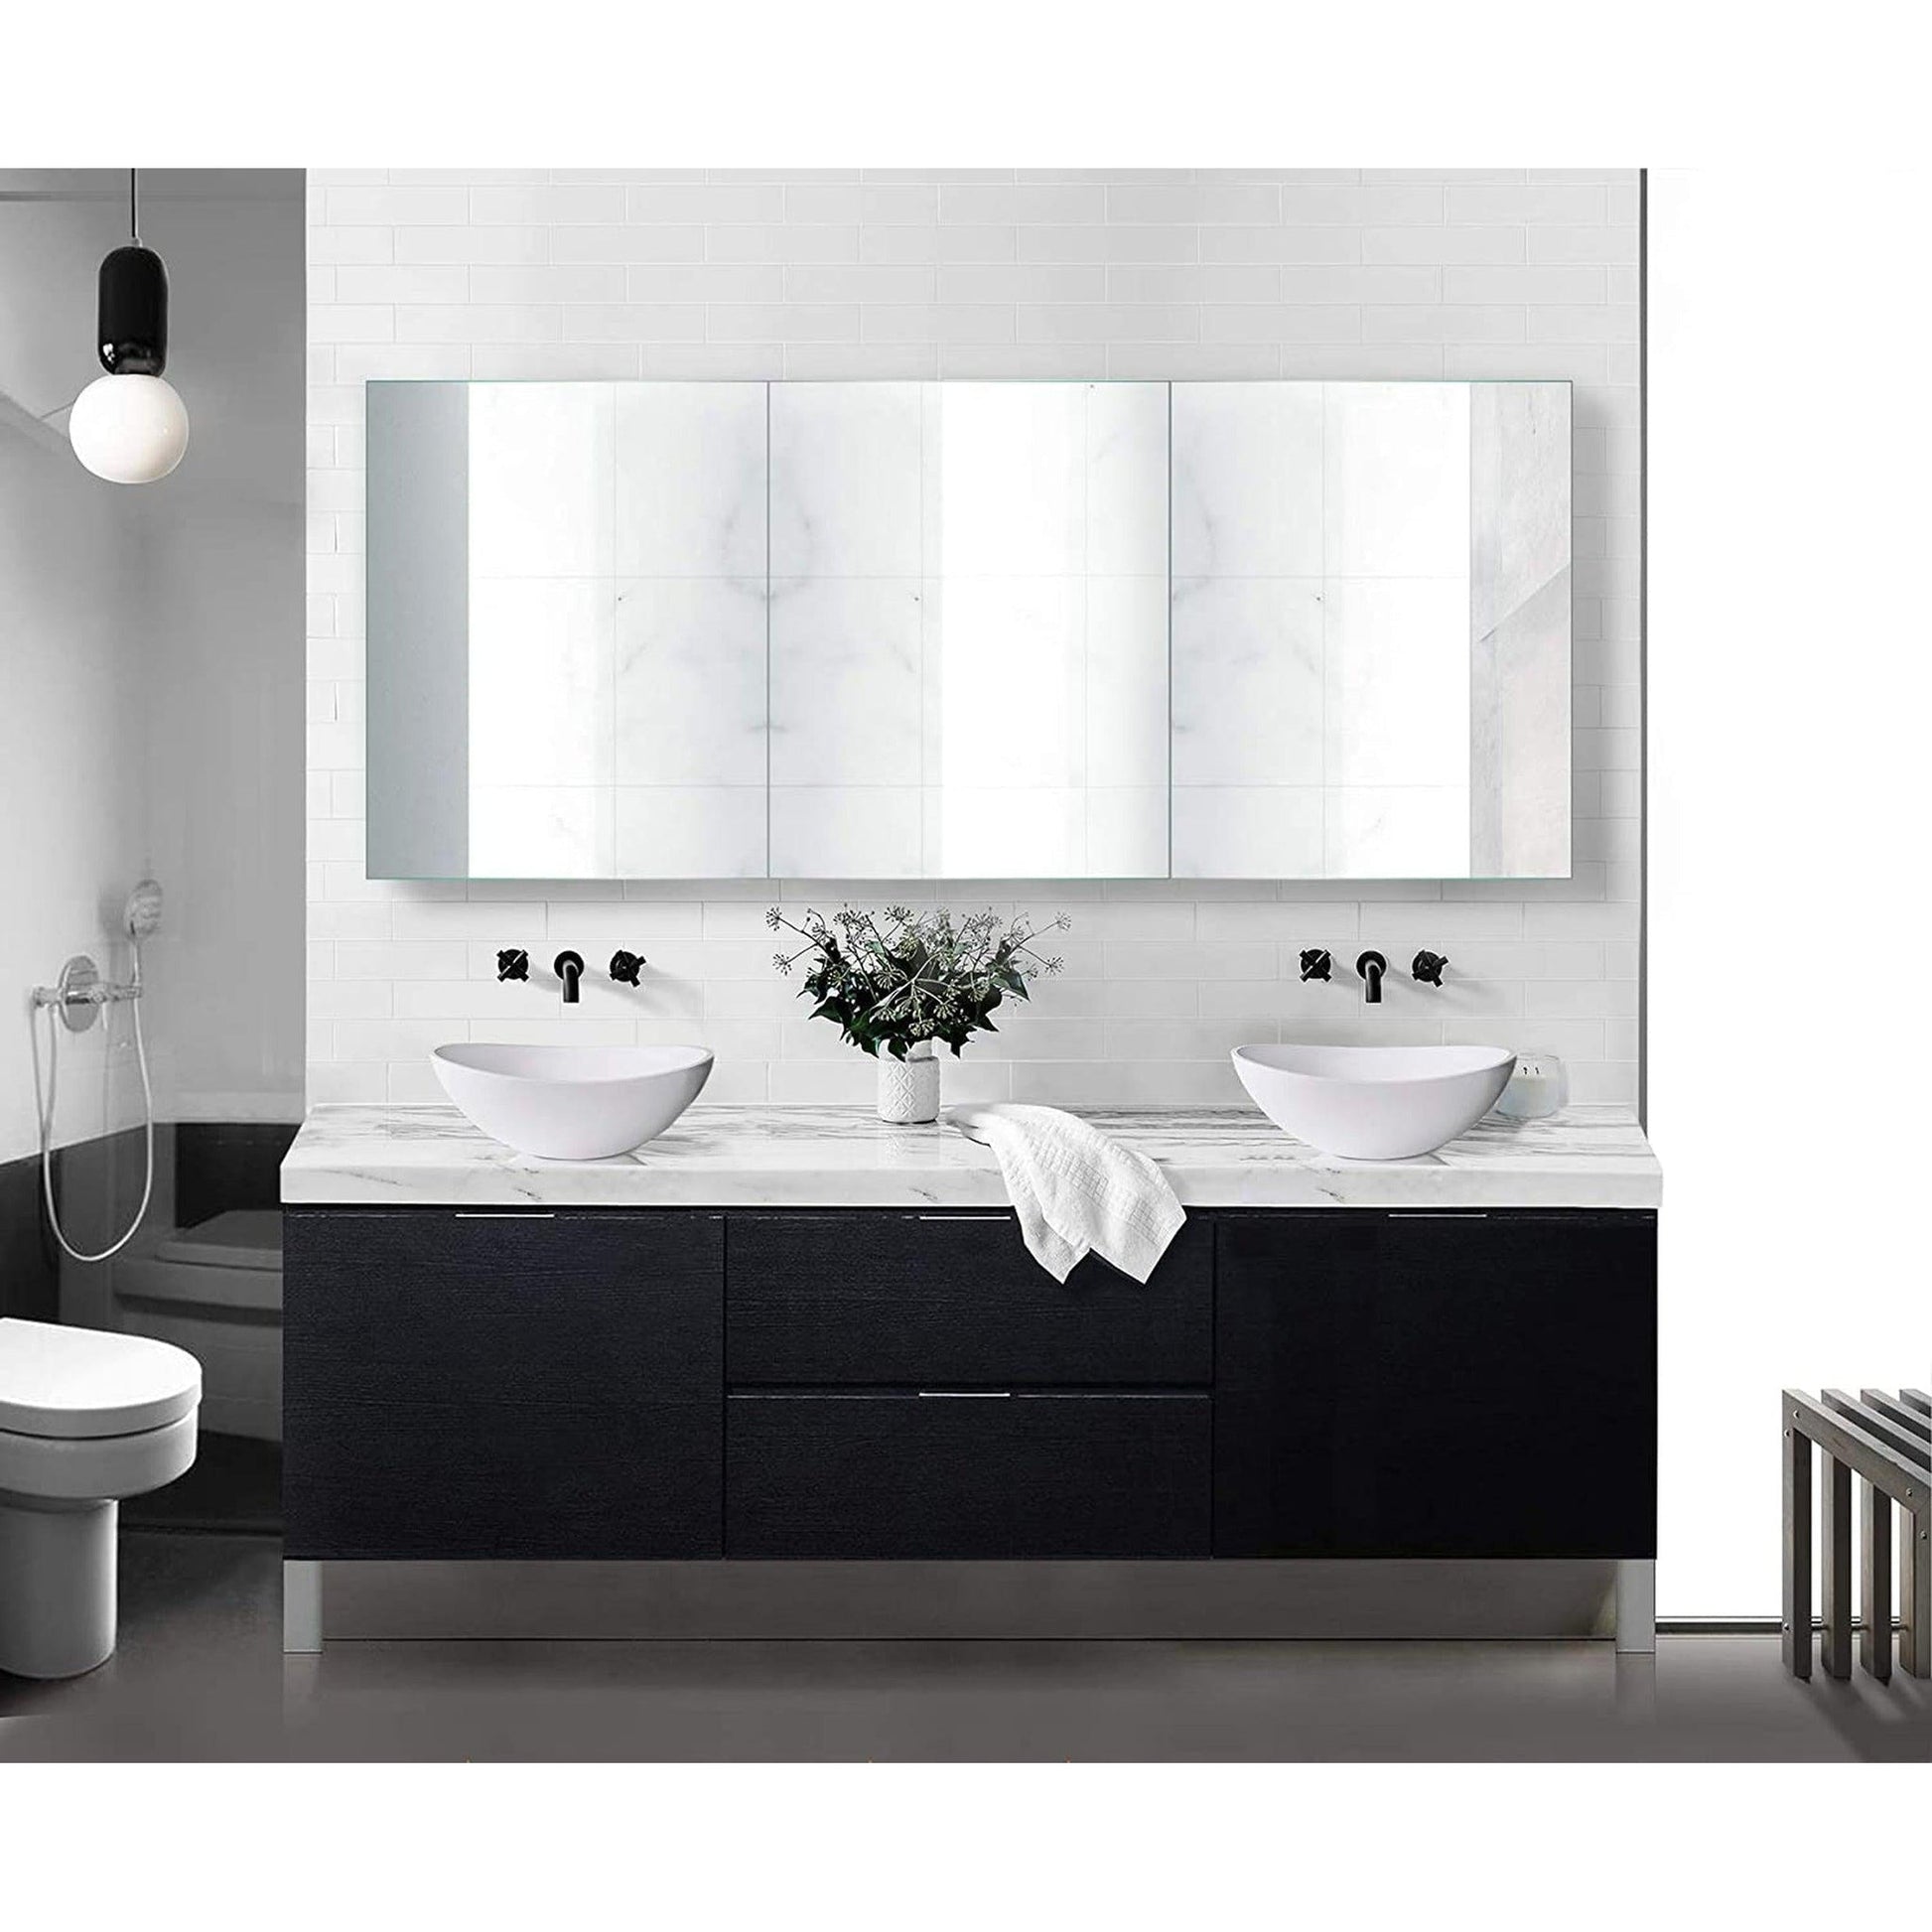 Krugg Reflections Plaza 72" x 30" Tri-View Left-Right-Right Opening Rectangular Recessed/Surface-Mount Medicine Cabinet Mirror